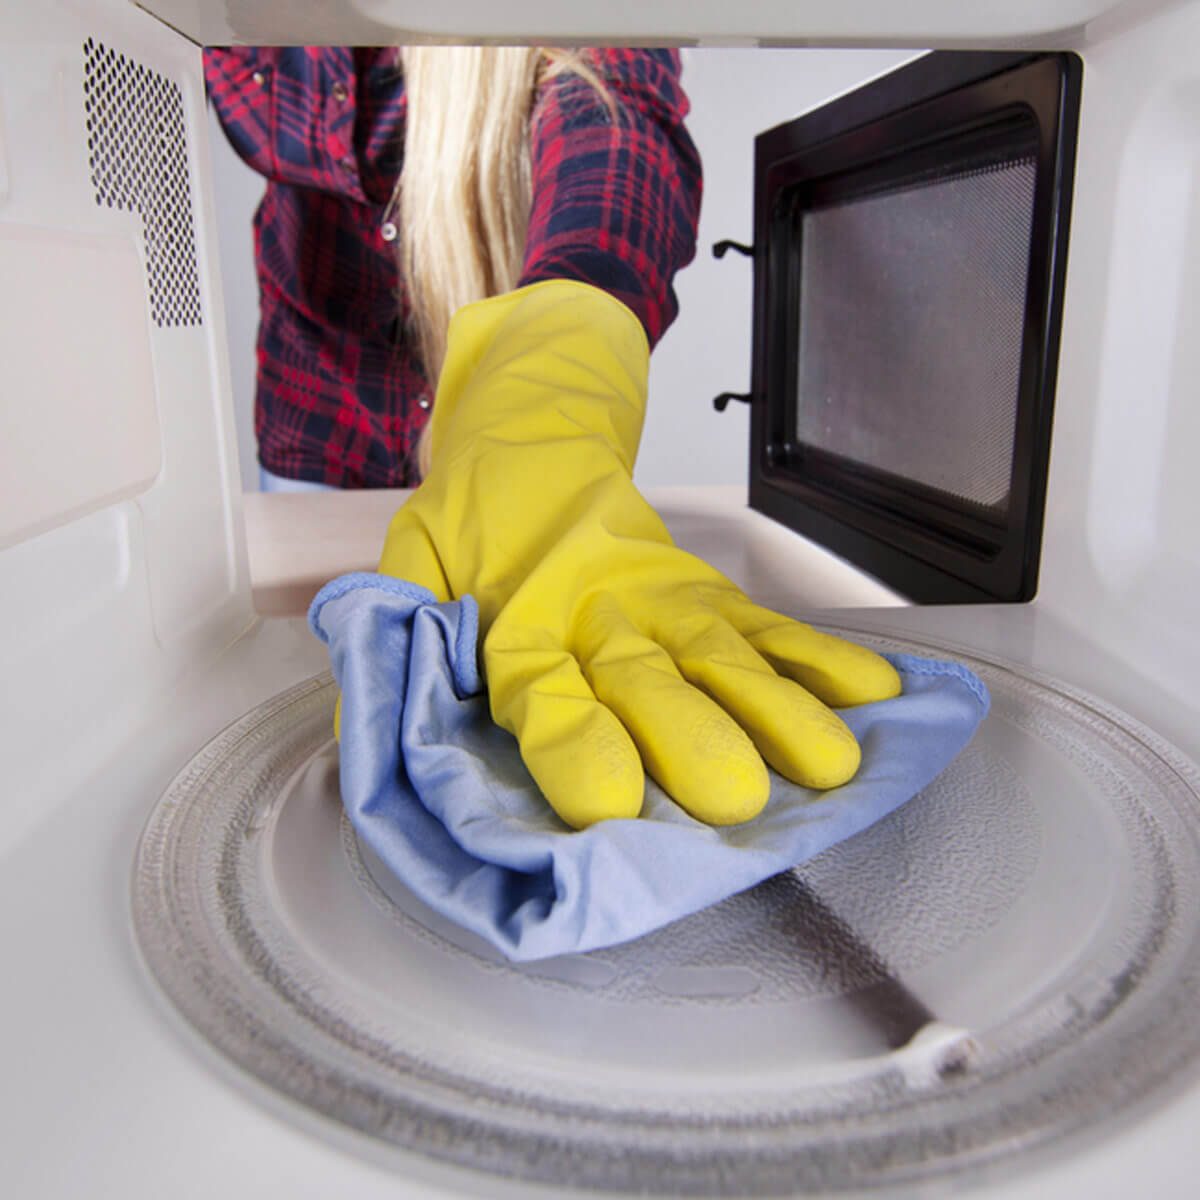 How to Clean Your Microwave